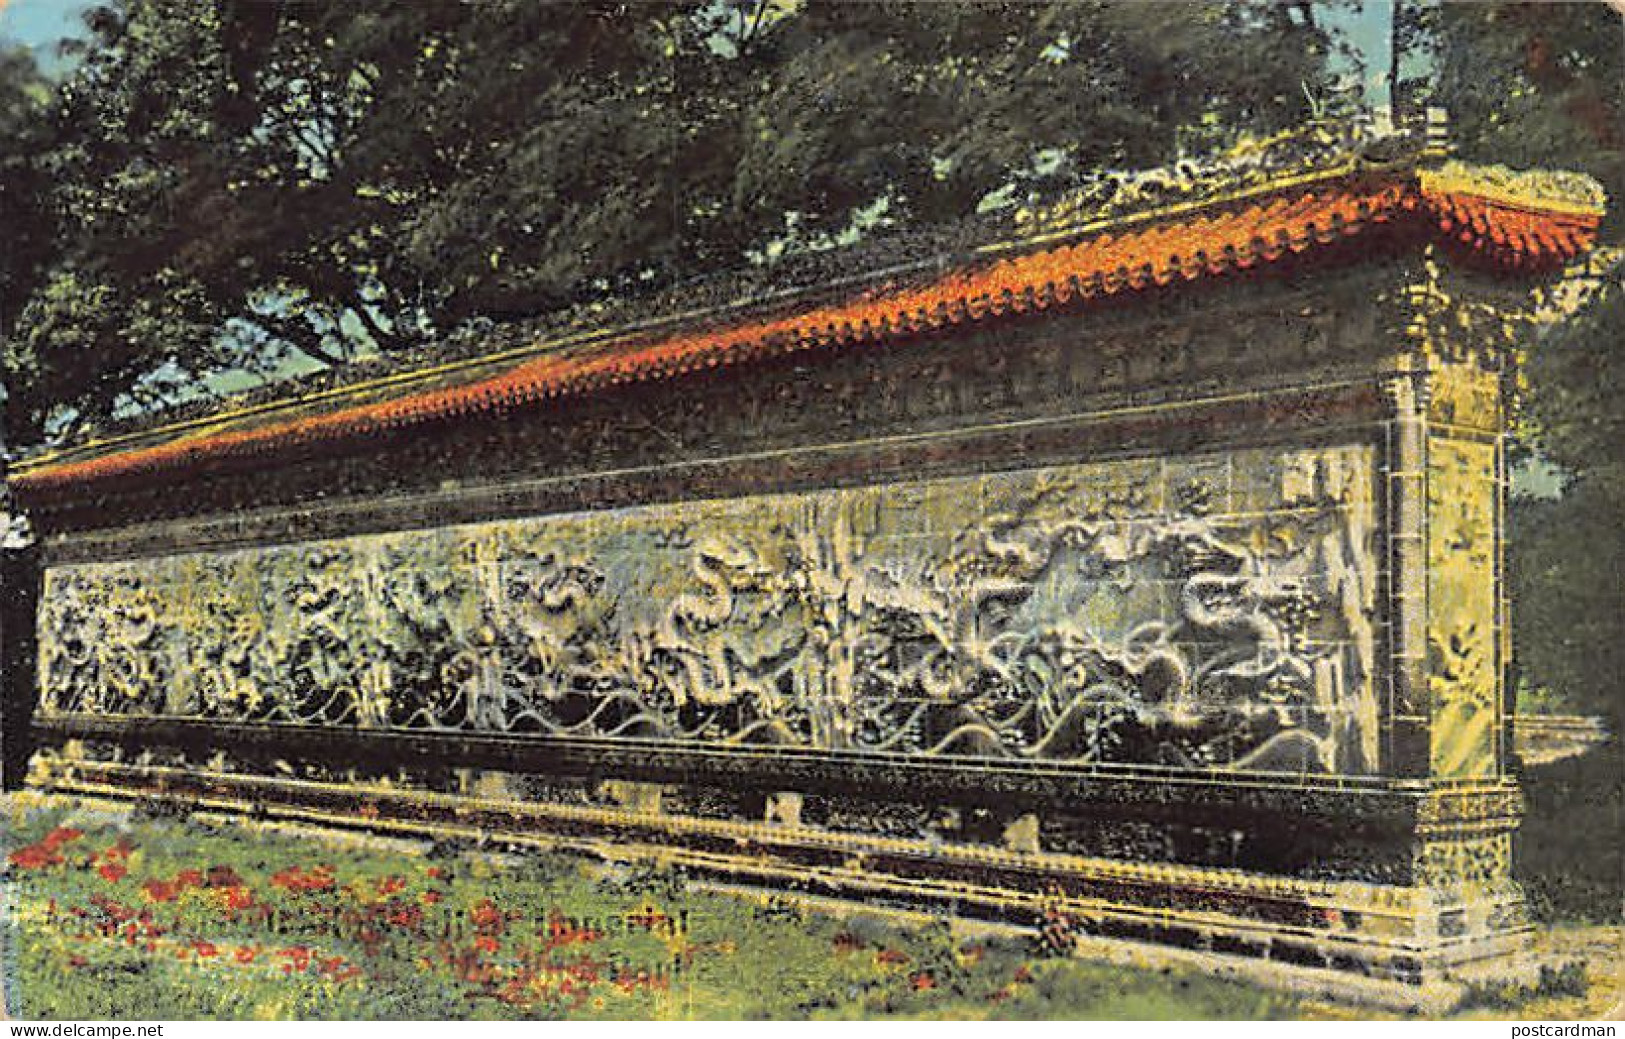 China - BEIJING - Glazed Tile Wall In The Imperial Hunting Park - Publ. Unknown 13906 - Chine